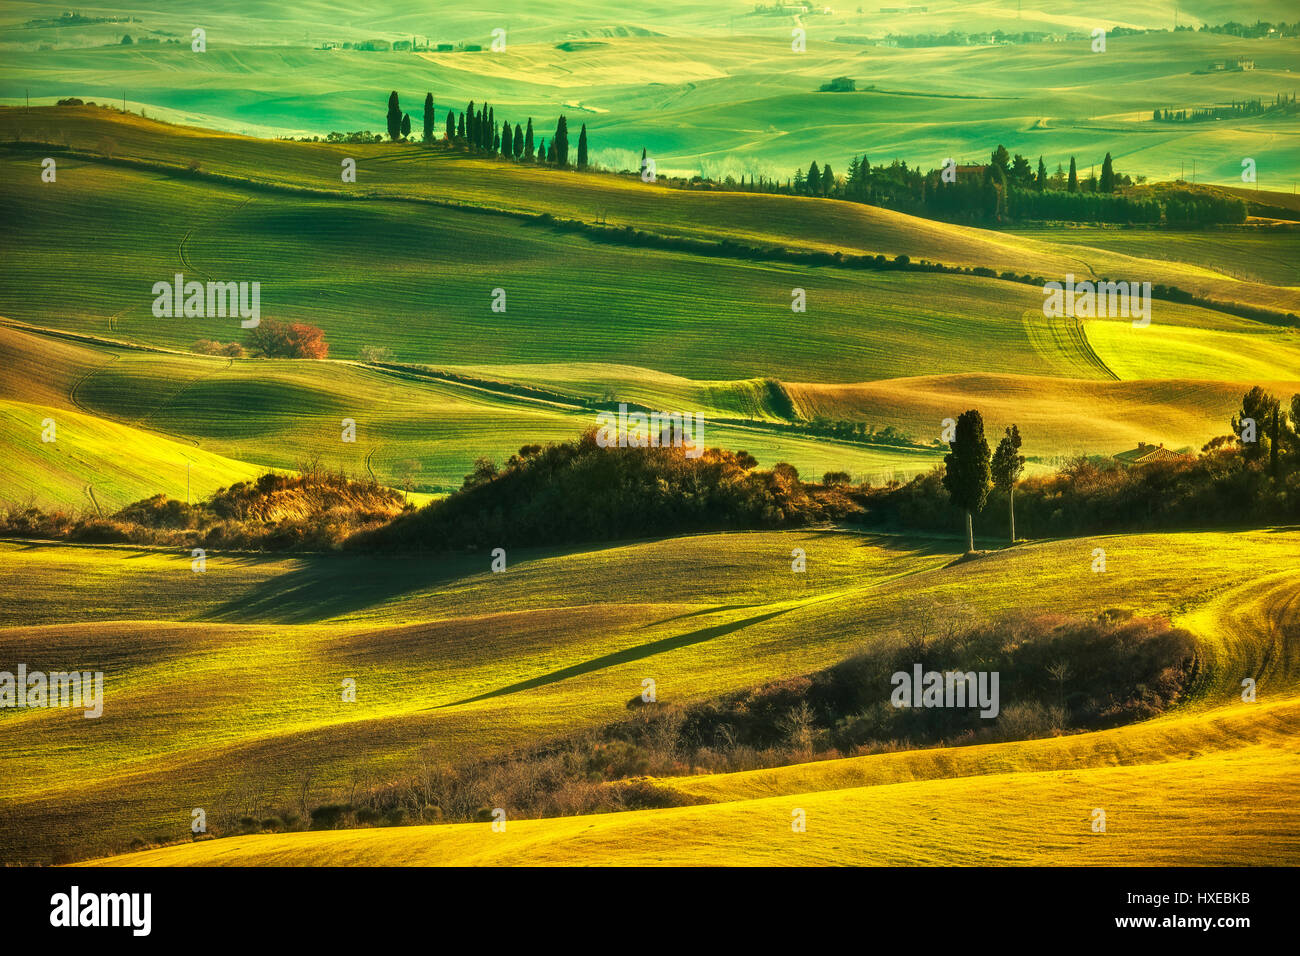 Tuscany spring, rolling hills on misty sunset. Rural landscape. Green fields and farmlands. Italy, Europe Stock Photo